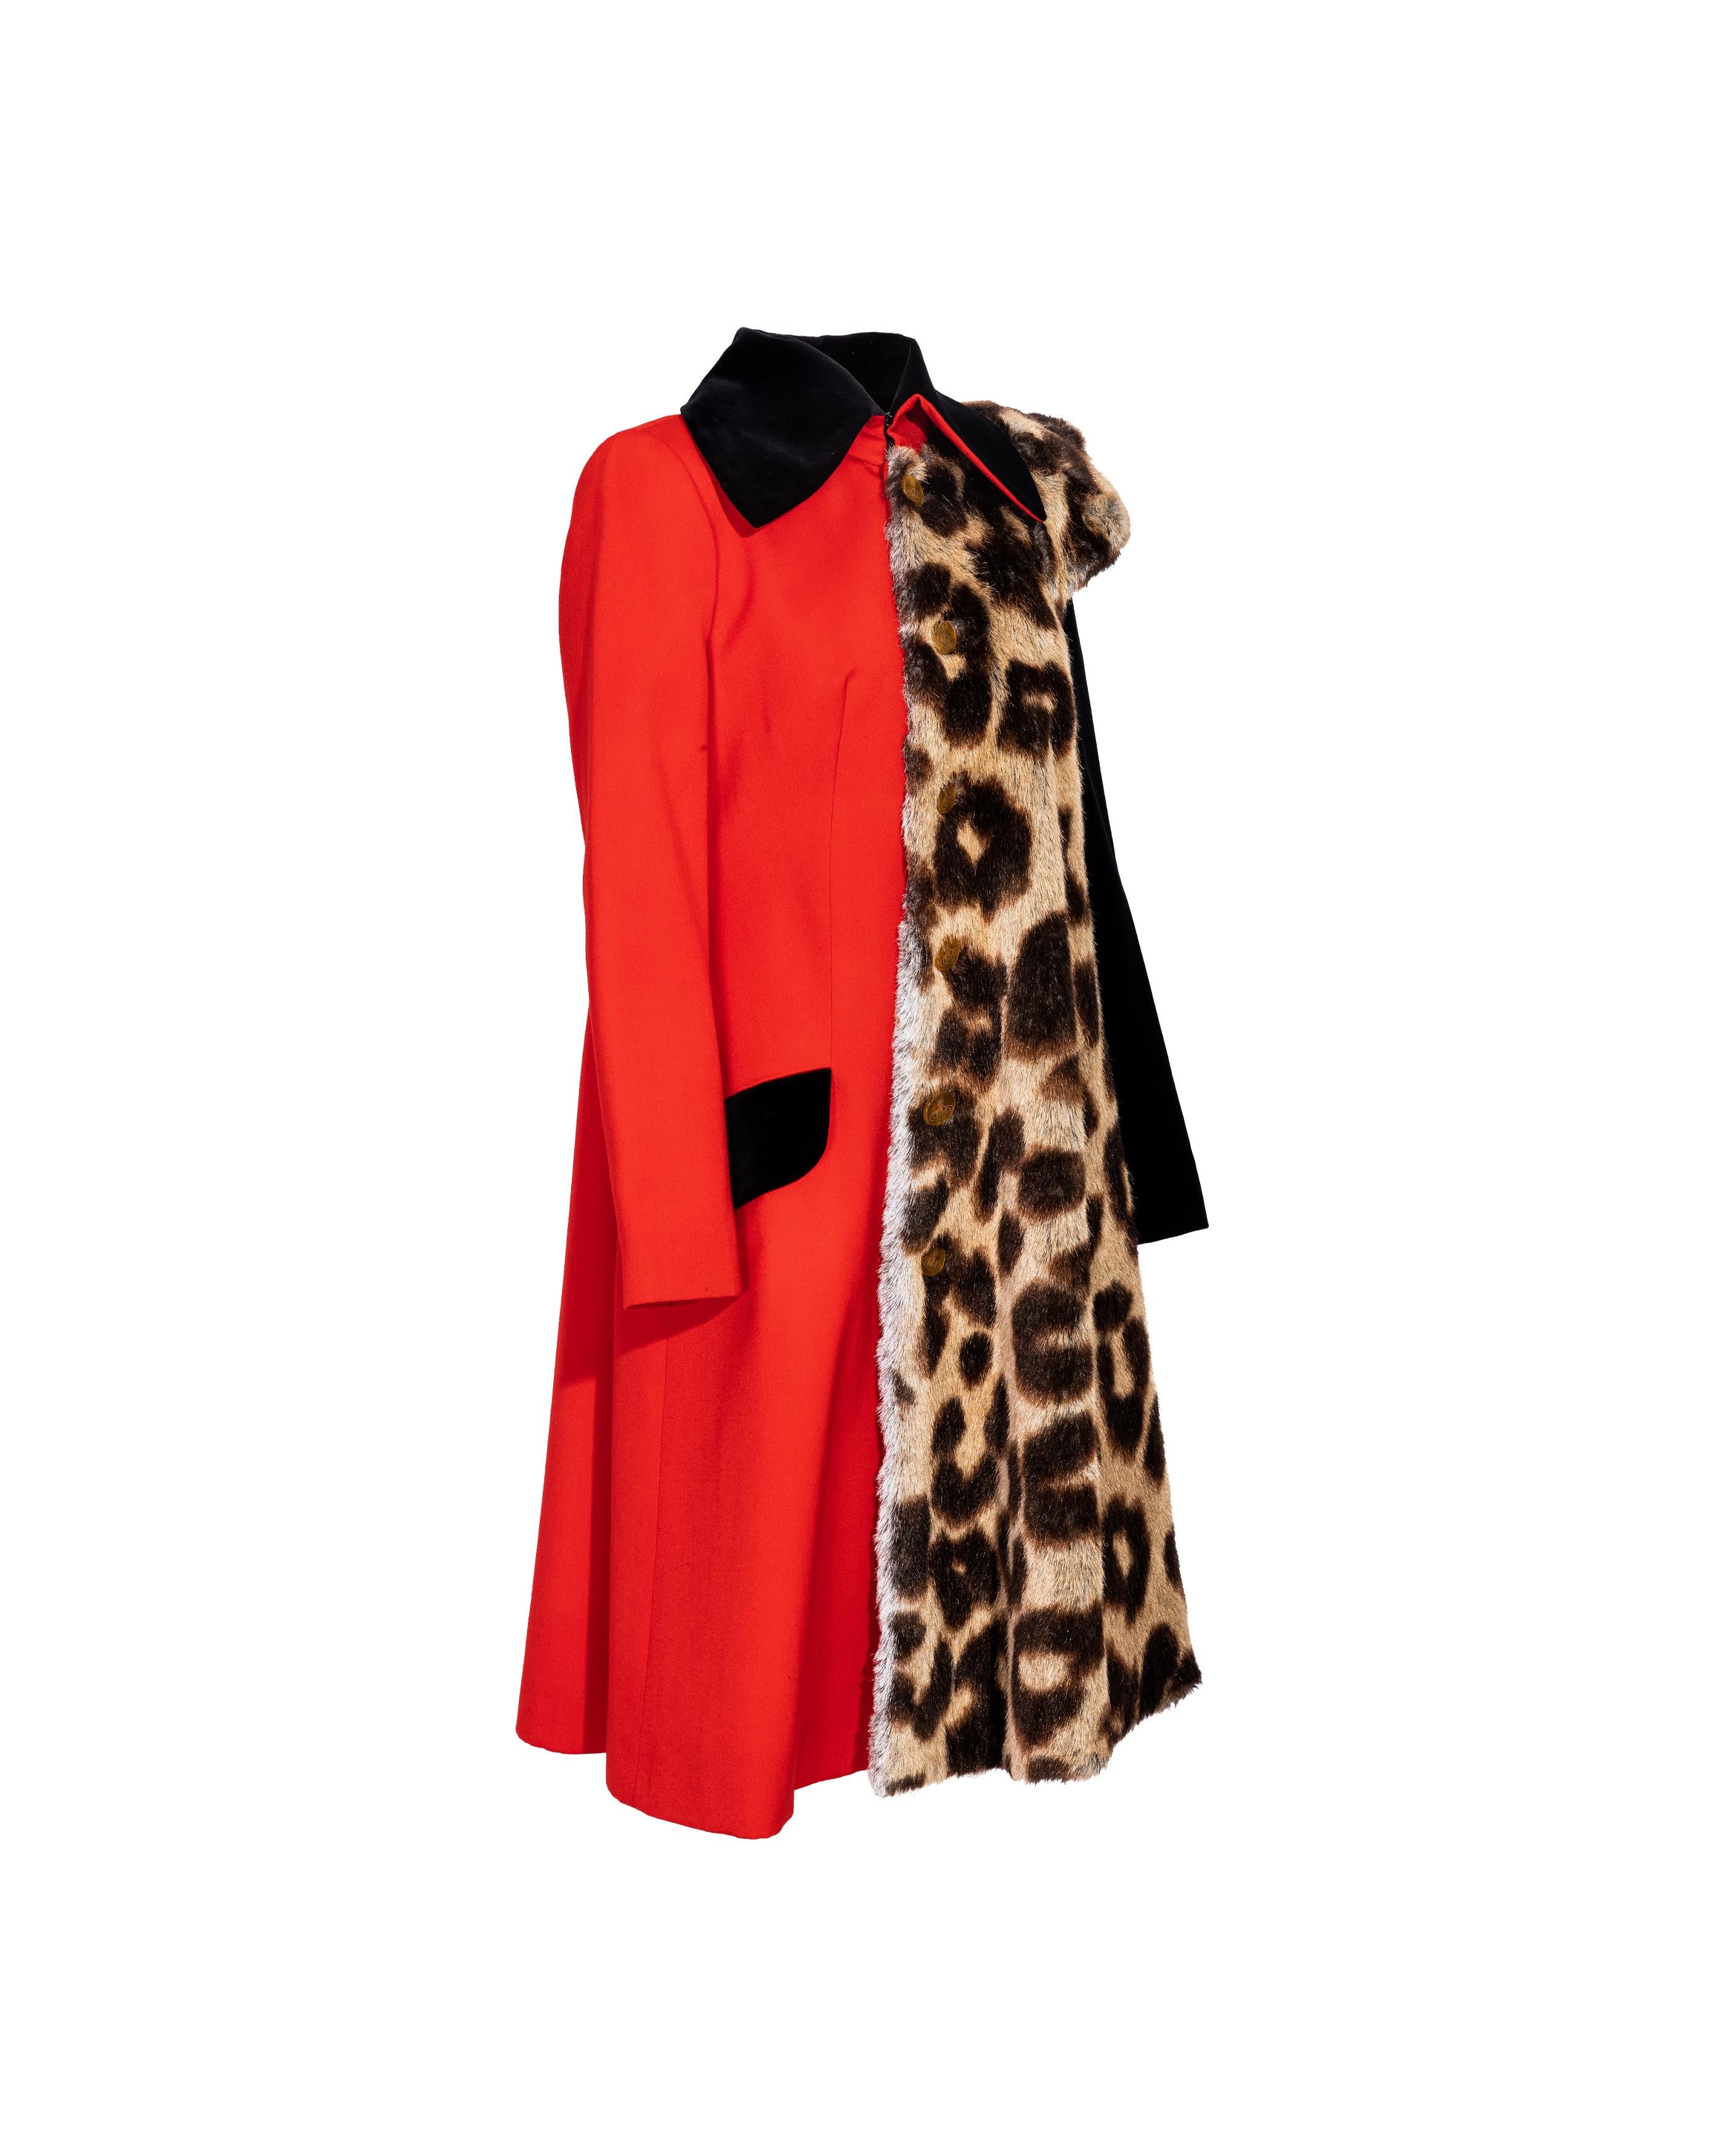 A/W 1996 Vivienne Westwood Red and Leopard Print Contrast Coat For Sale 1